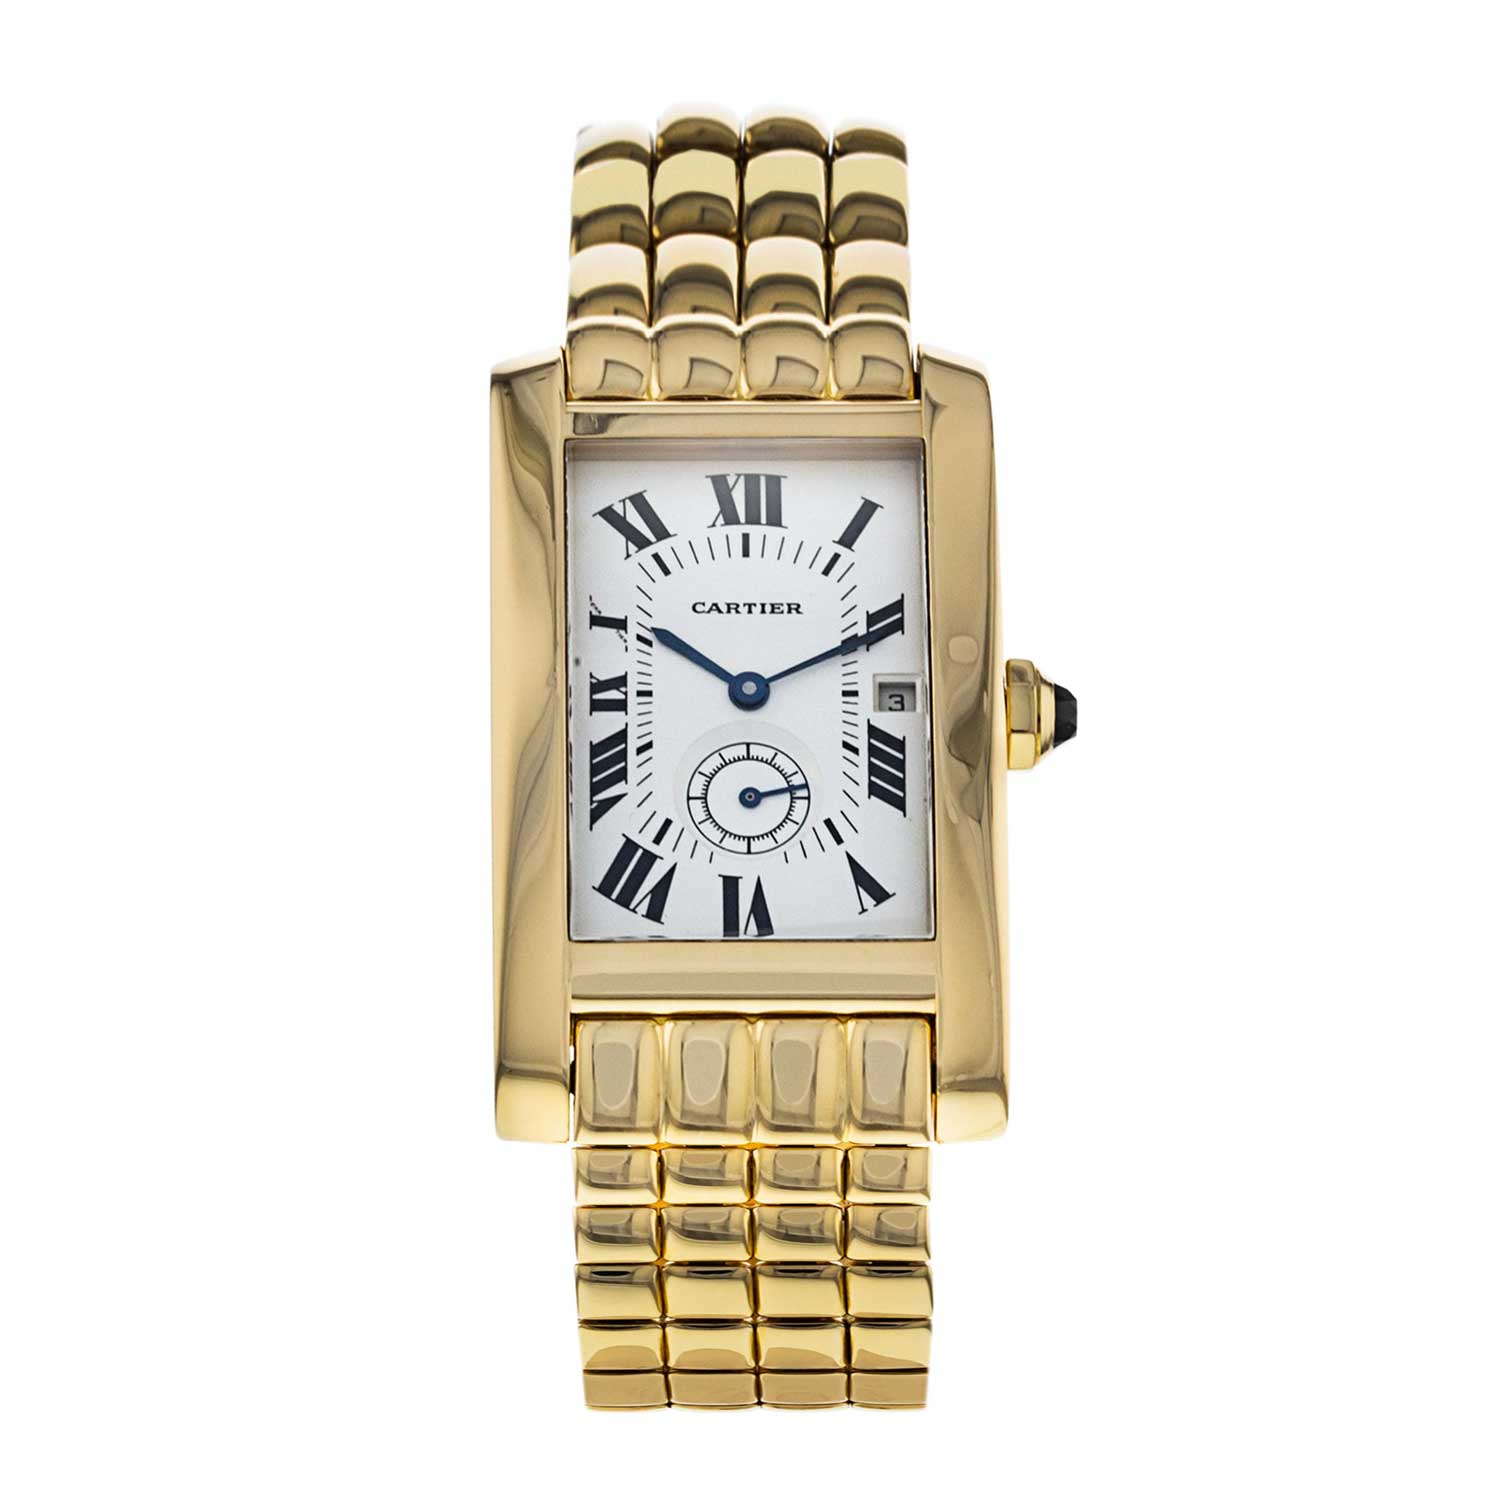 The present example of the Cartier Tank Americaine at our shop is from 1997